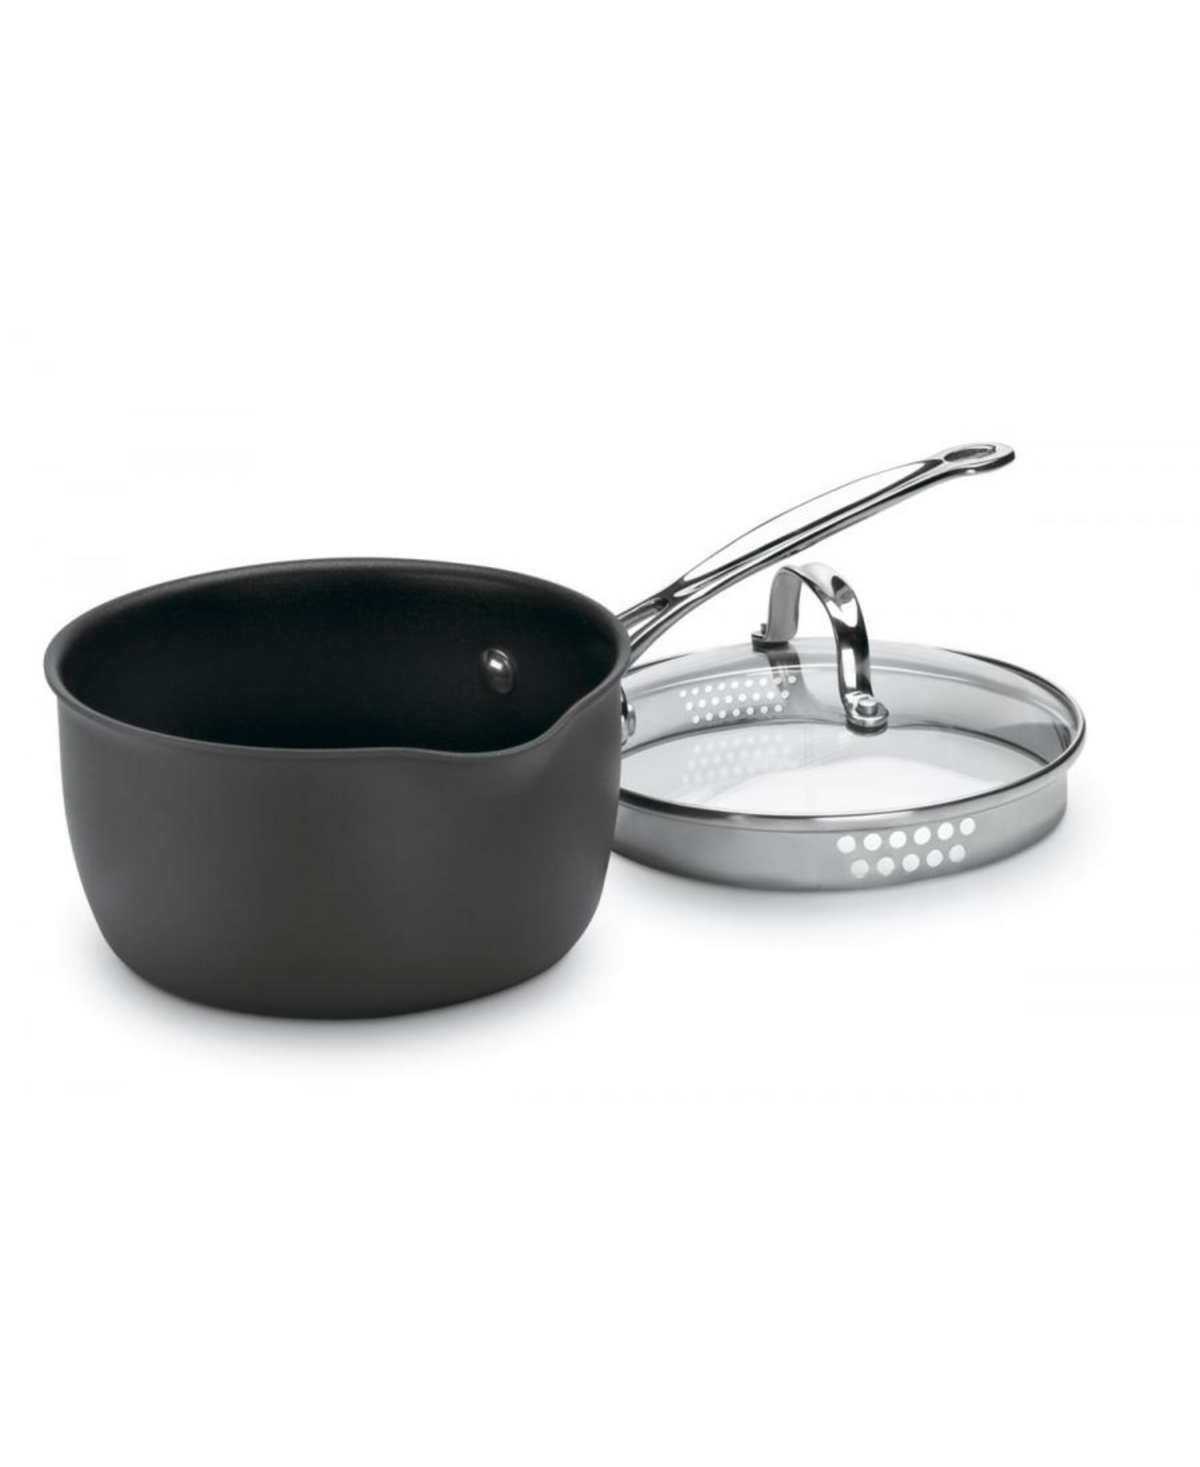 Cuisinart Chefs Classic Hard Anodized 2-qt. Cook And Pour Saucepan W/ Cover In Nonstick Hard Anodized